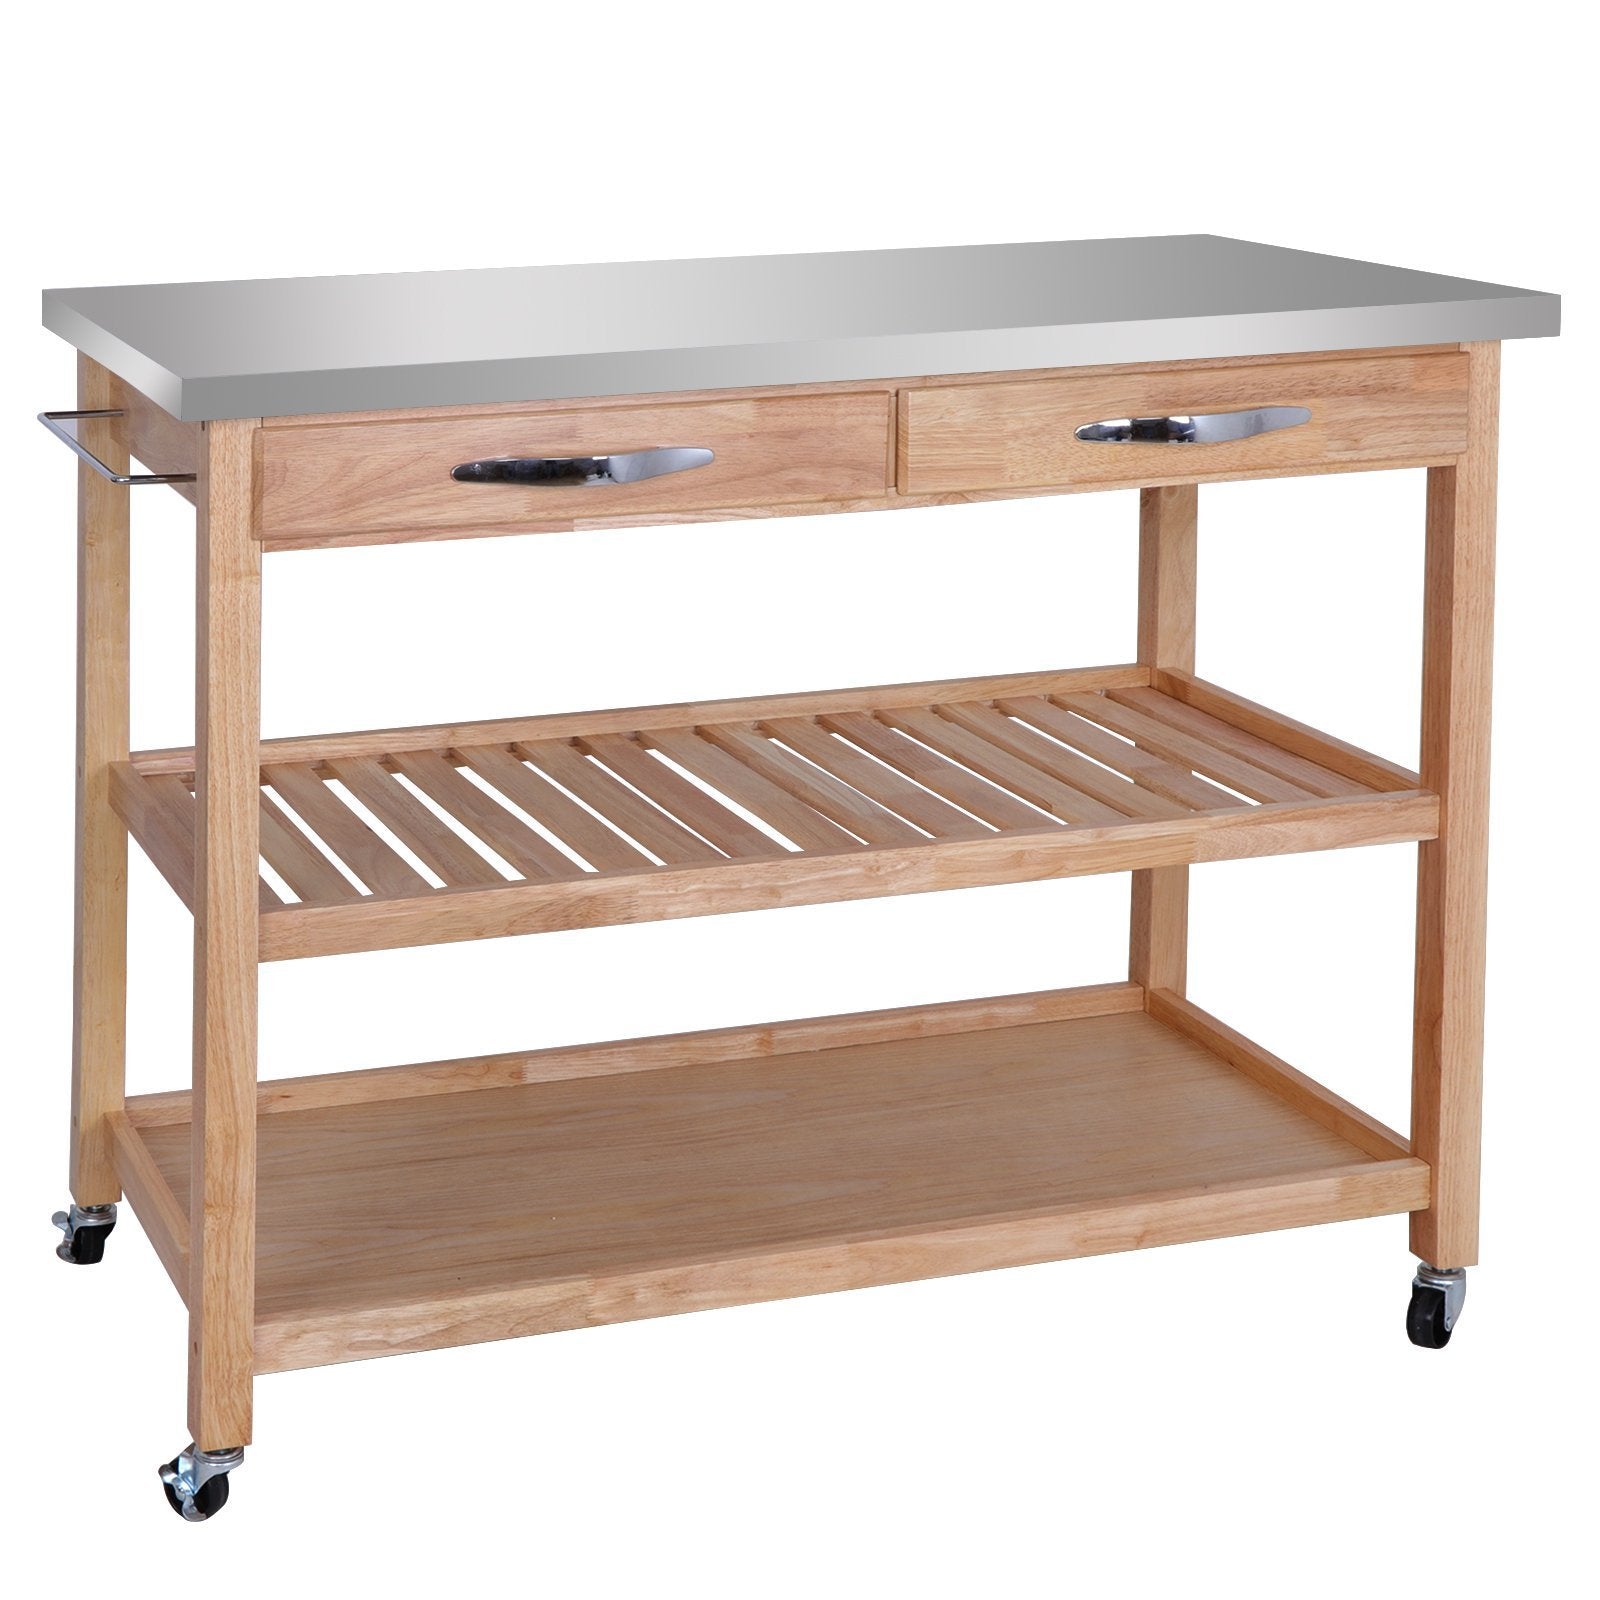 Explore zenstyle 3 tier rolling kitchen island utility wood serving cart stainless steel countertop kitchen storage cart w shelves drawers towel rack